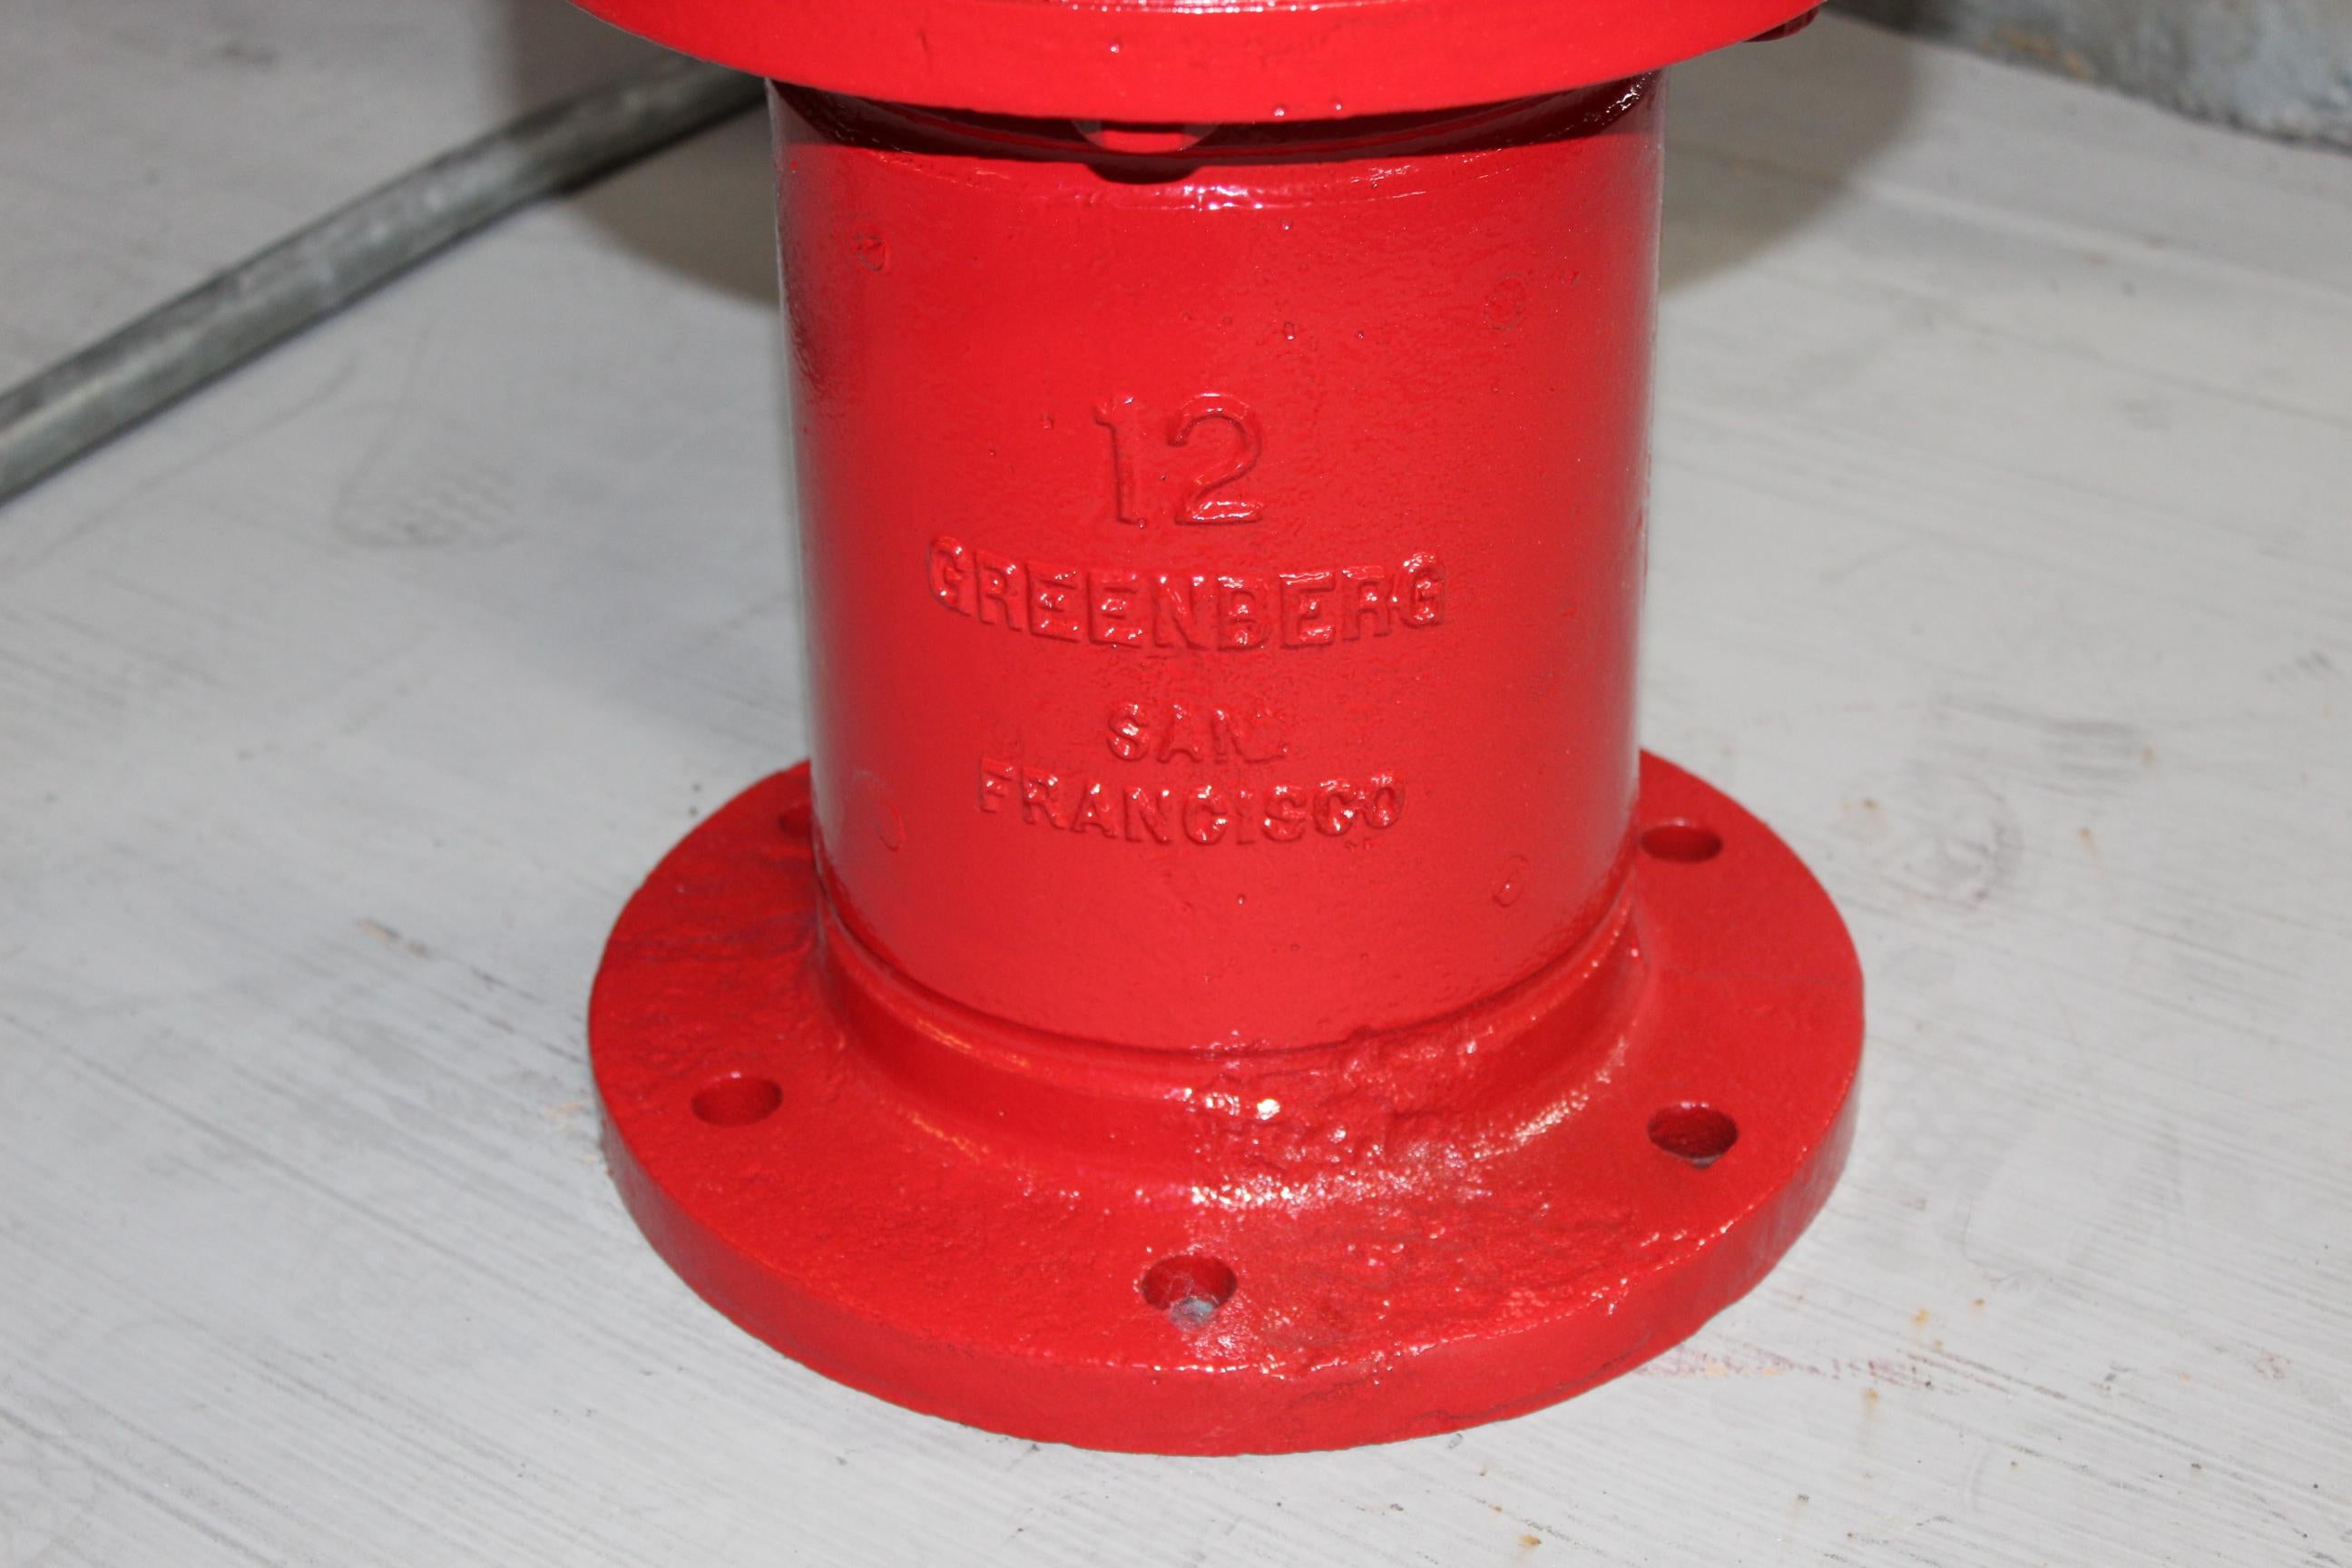 American 1959 M. Greenberg's Sons Fire Hydrant For Sale